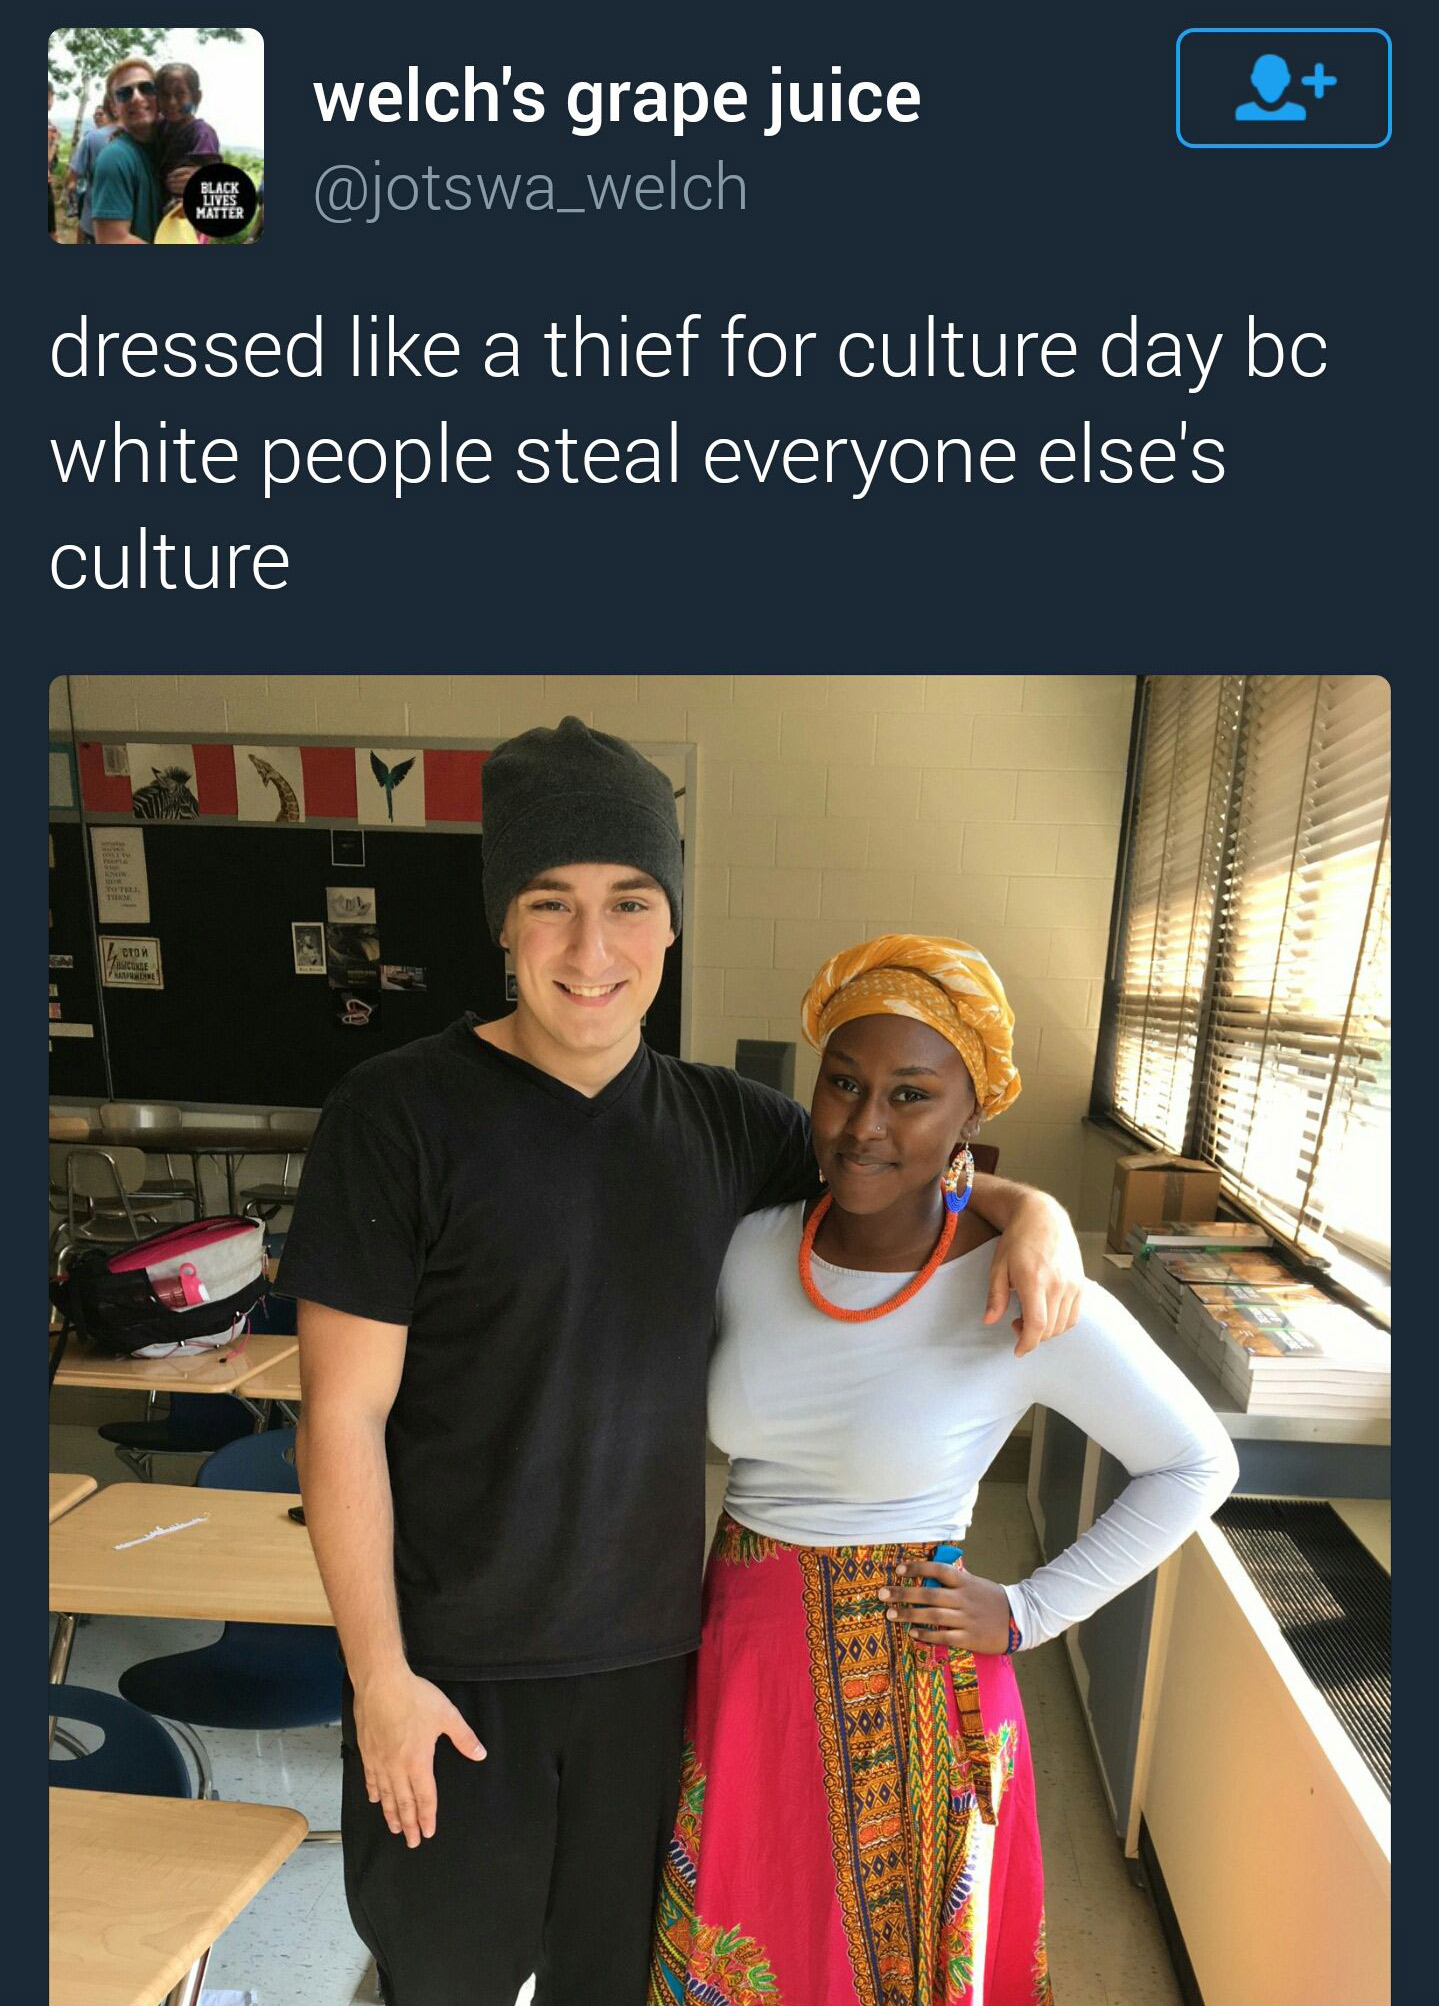 white people steal culture - welch's grape juice 206 dressed a thief for culture day bc white people steal everyone else's culture